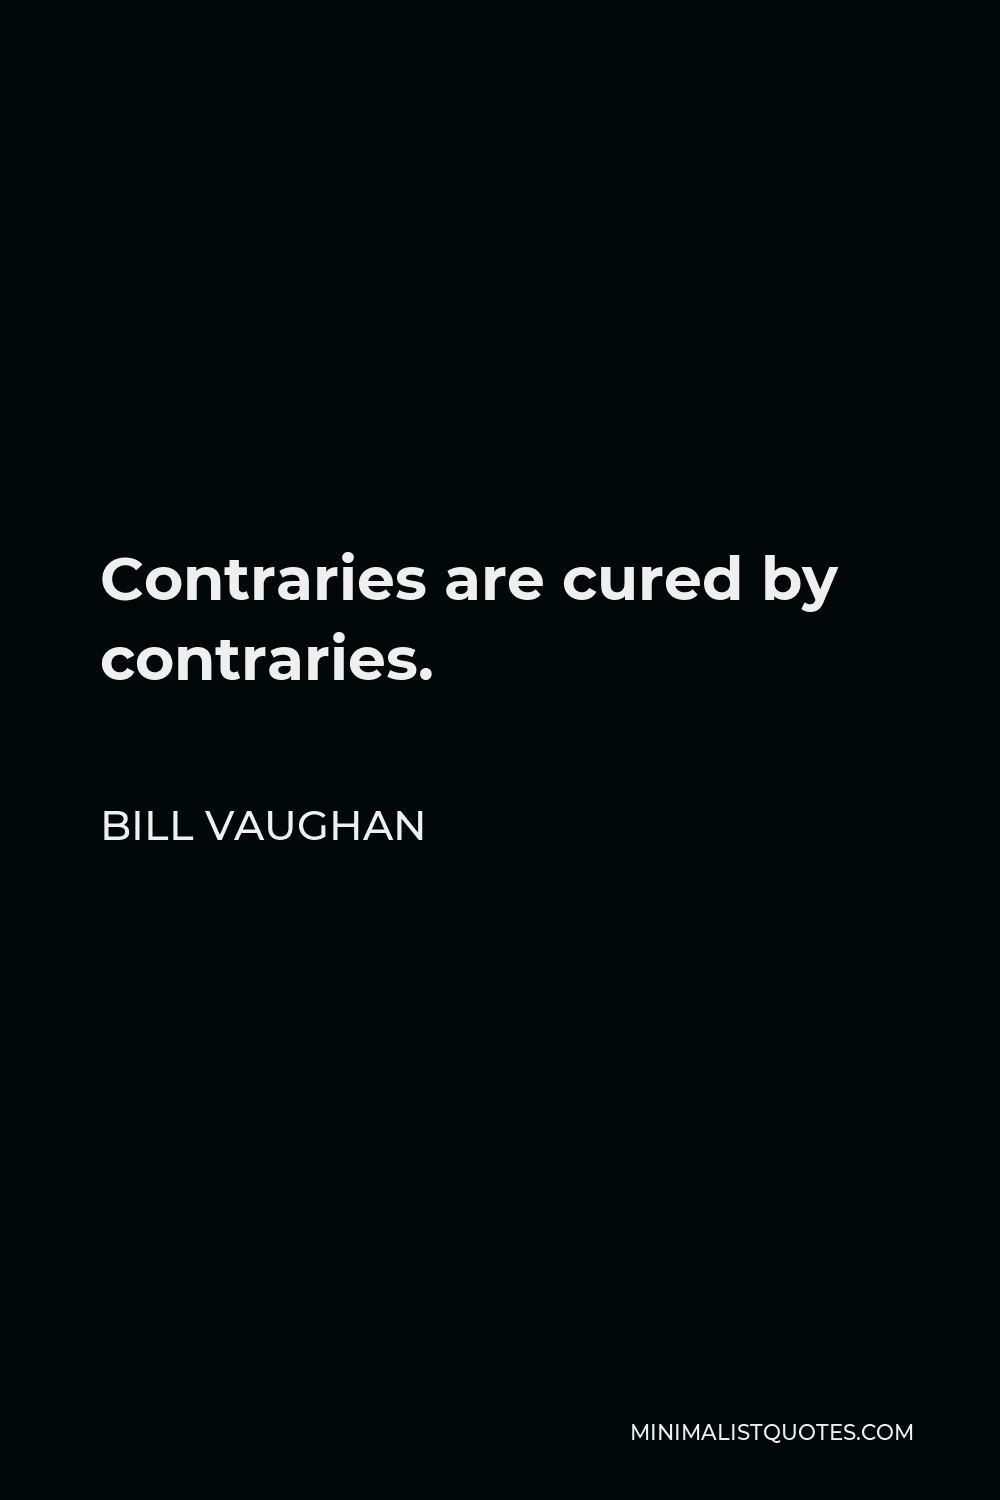 Bill Vaughan Quote - Contraries are cured by contraries.